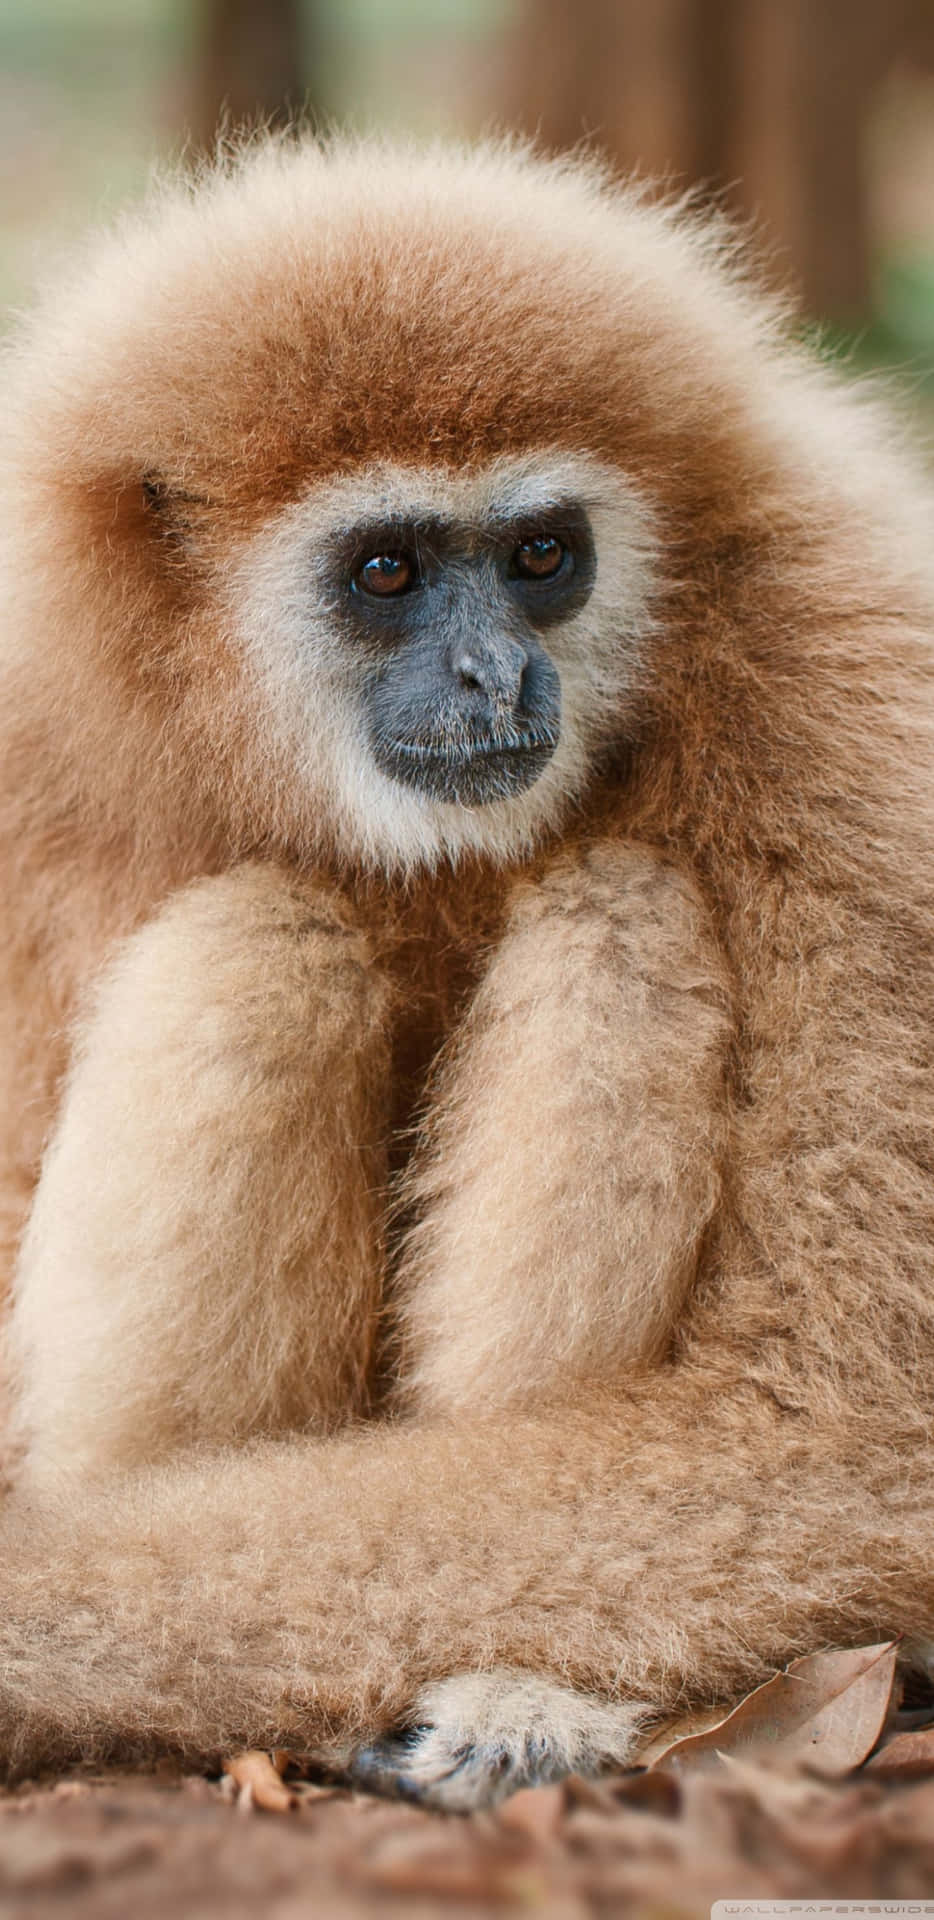 Get up close to nature with the Pixel 3xL Gibbon.